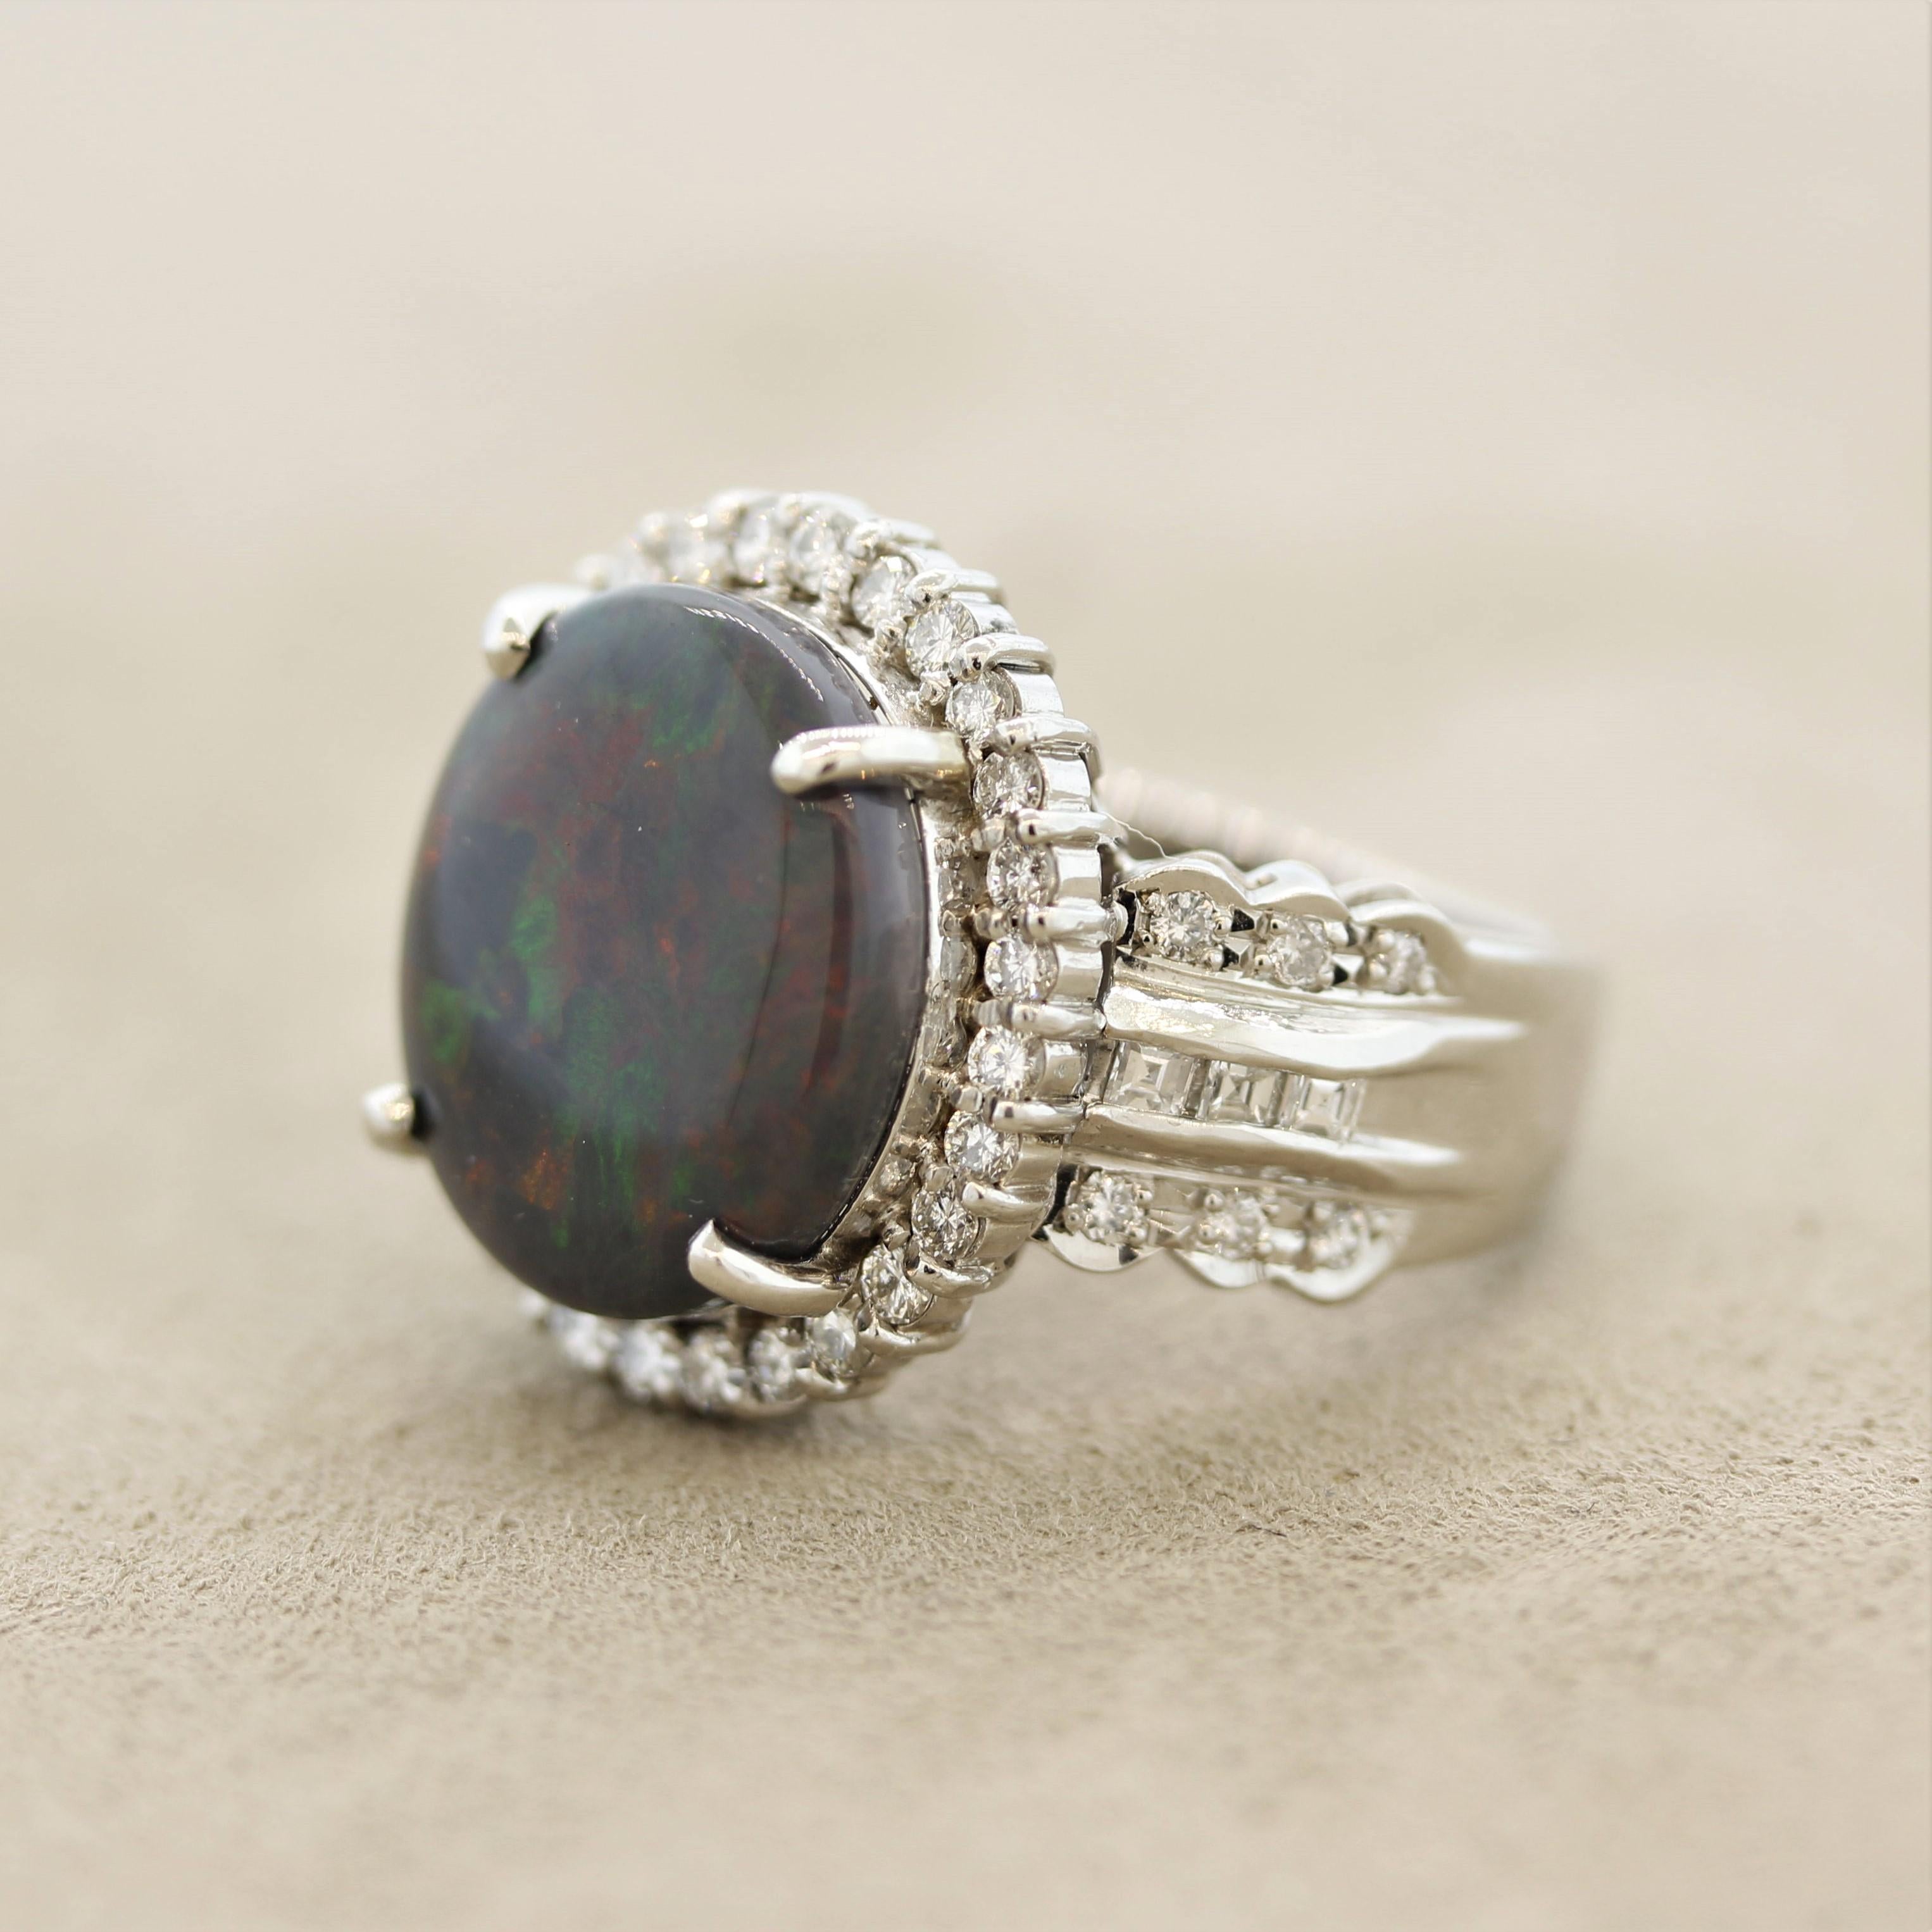 A lovely platinum made ring featuring a 2.95 carat natural Australian opal. It has great play-of-color as bright strong flashes of green, blue and some yellow/orange dance across the stone. It is complemented by 0.61 carats of round and baguette-cut